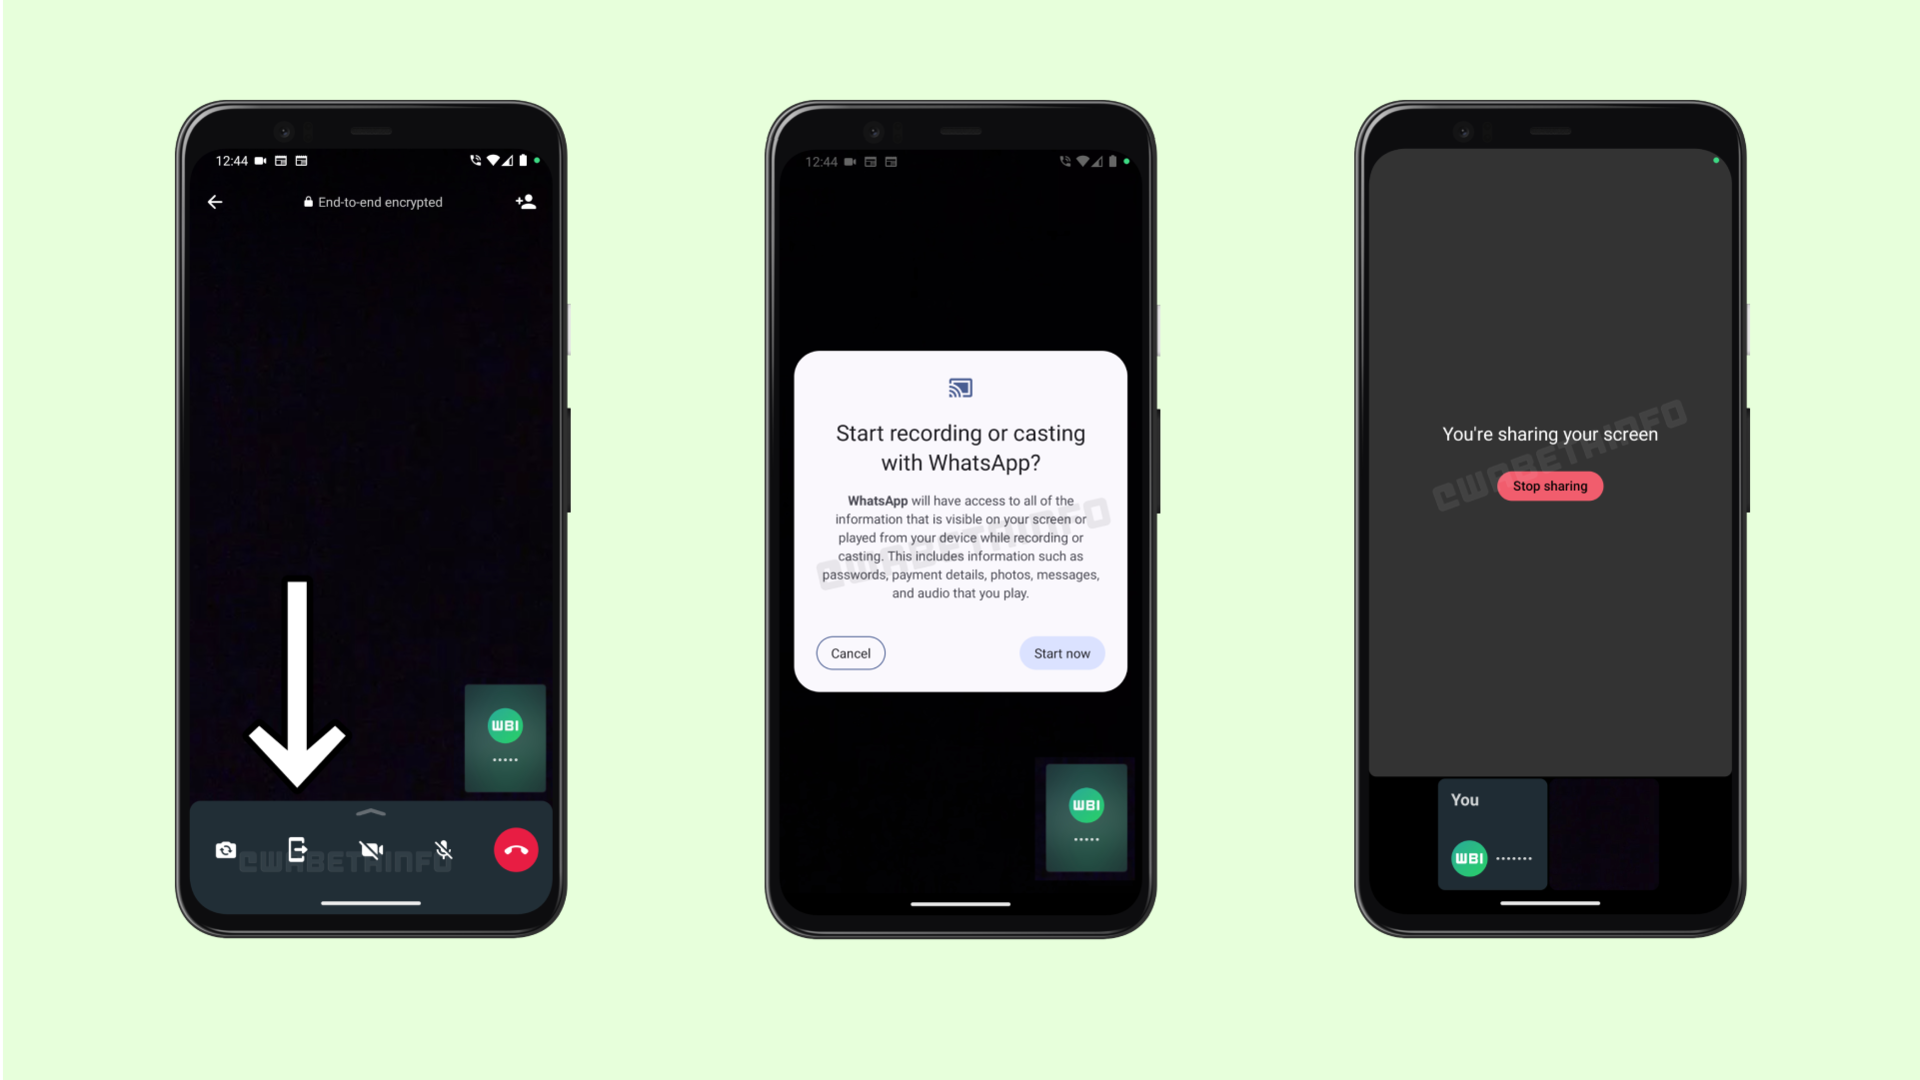 WhatsApp starts testing screen-sharing feature for video calls